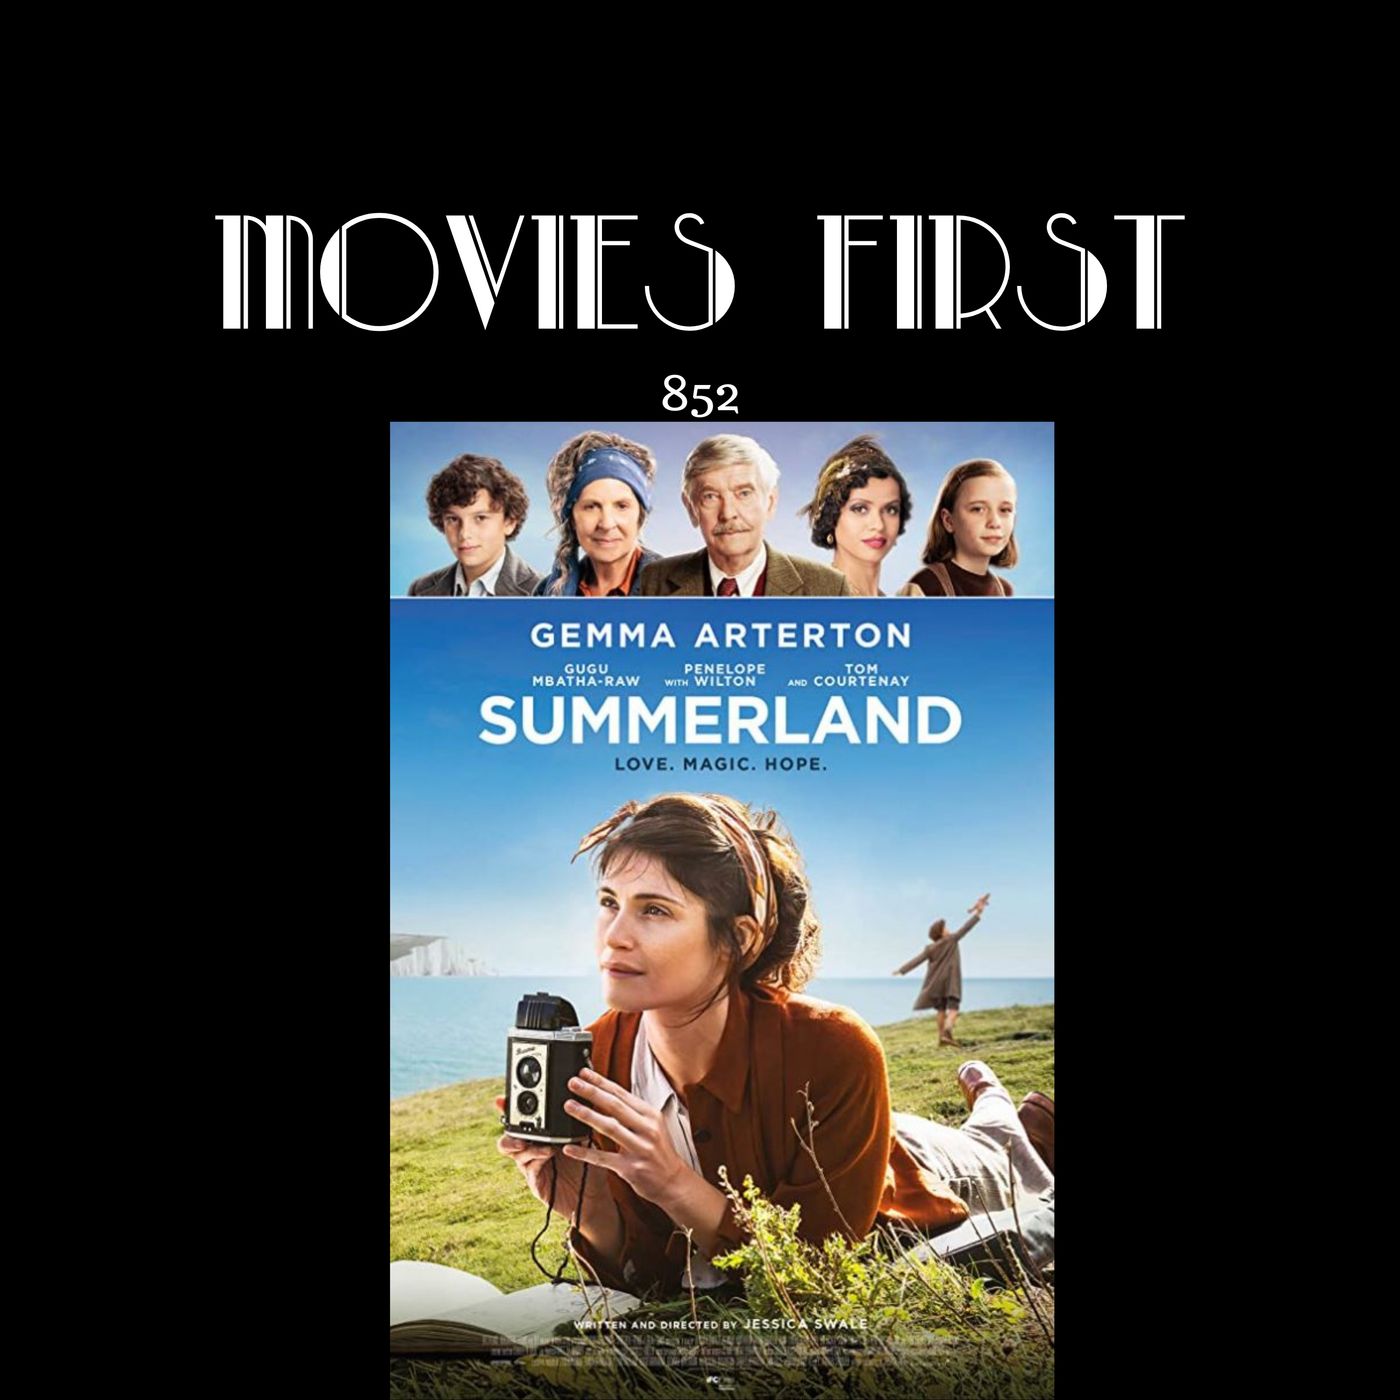 Summerland (Drama, Romance, War) (the @MoviesFirst review)